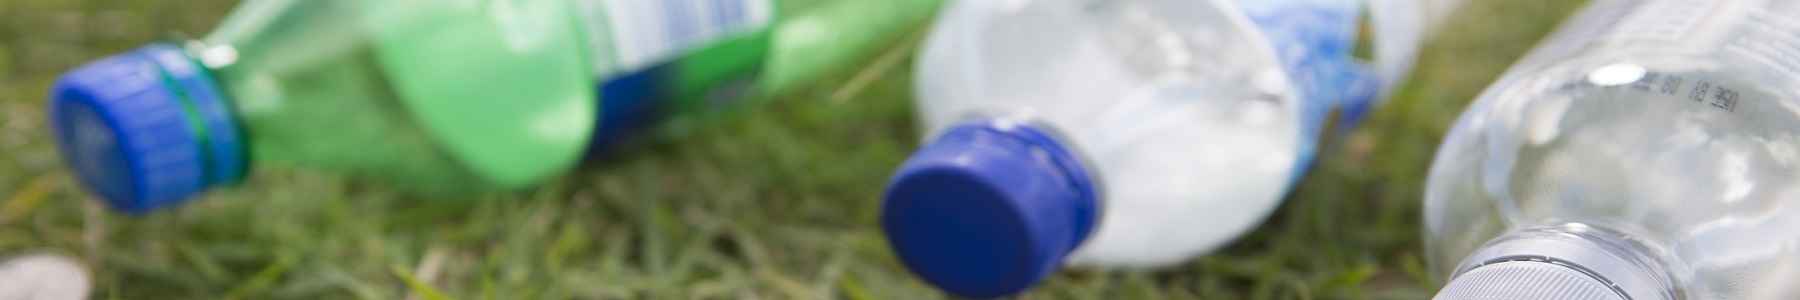 Recyclable bottles on grass